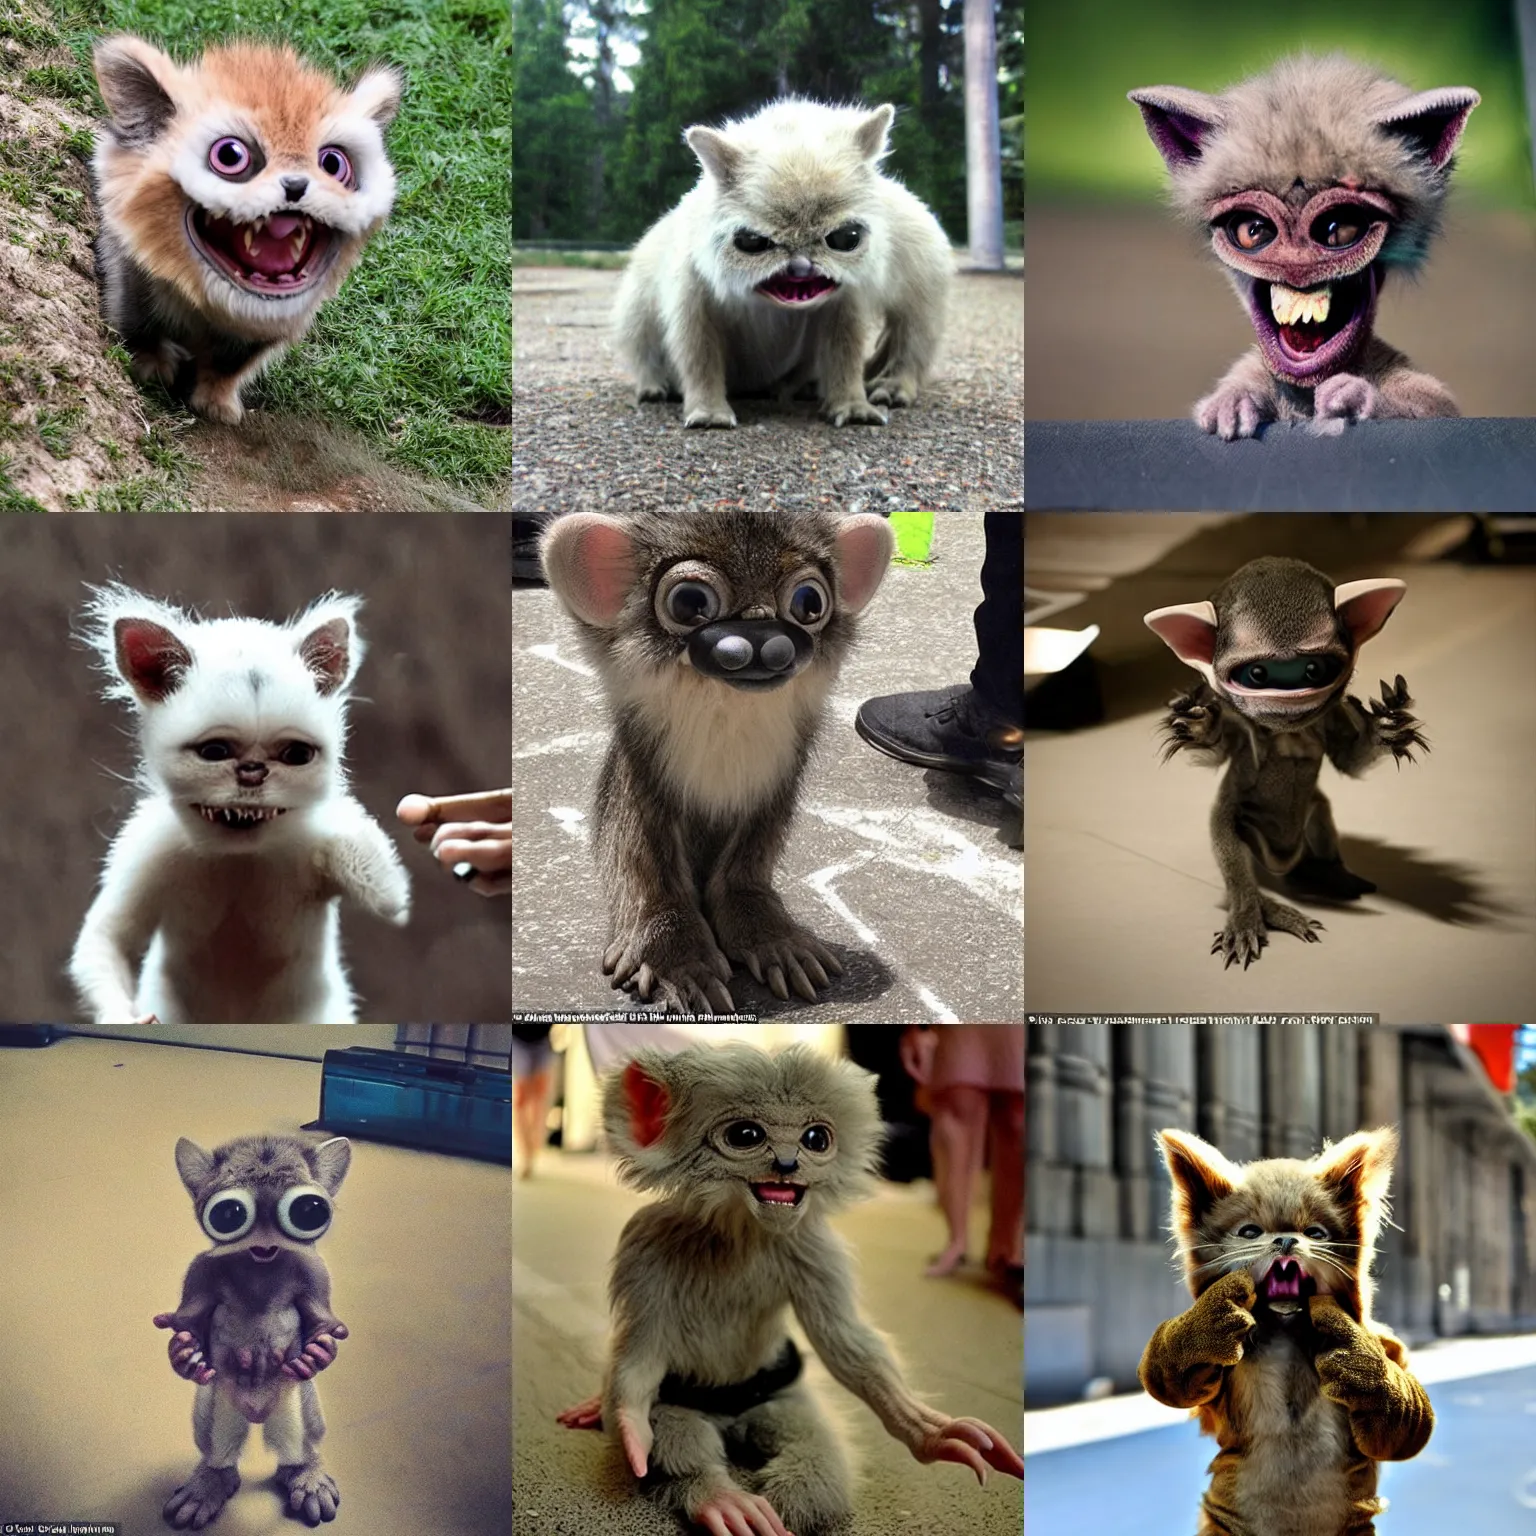 Prompt: < photo attention - grabbing > a small furry alien growls adorably but menacingly < / photo >